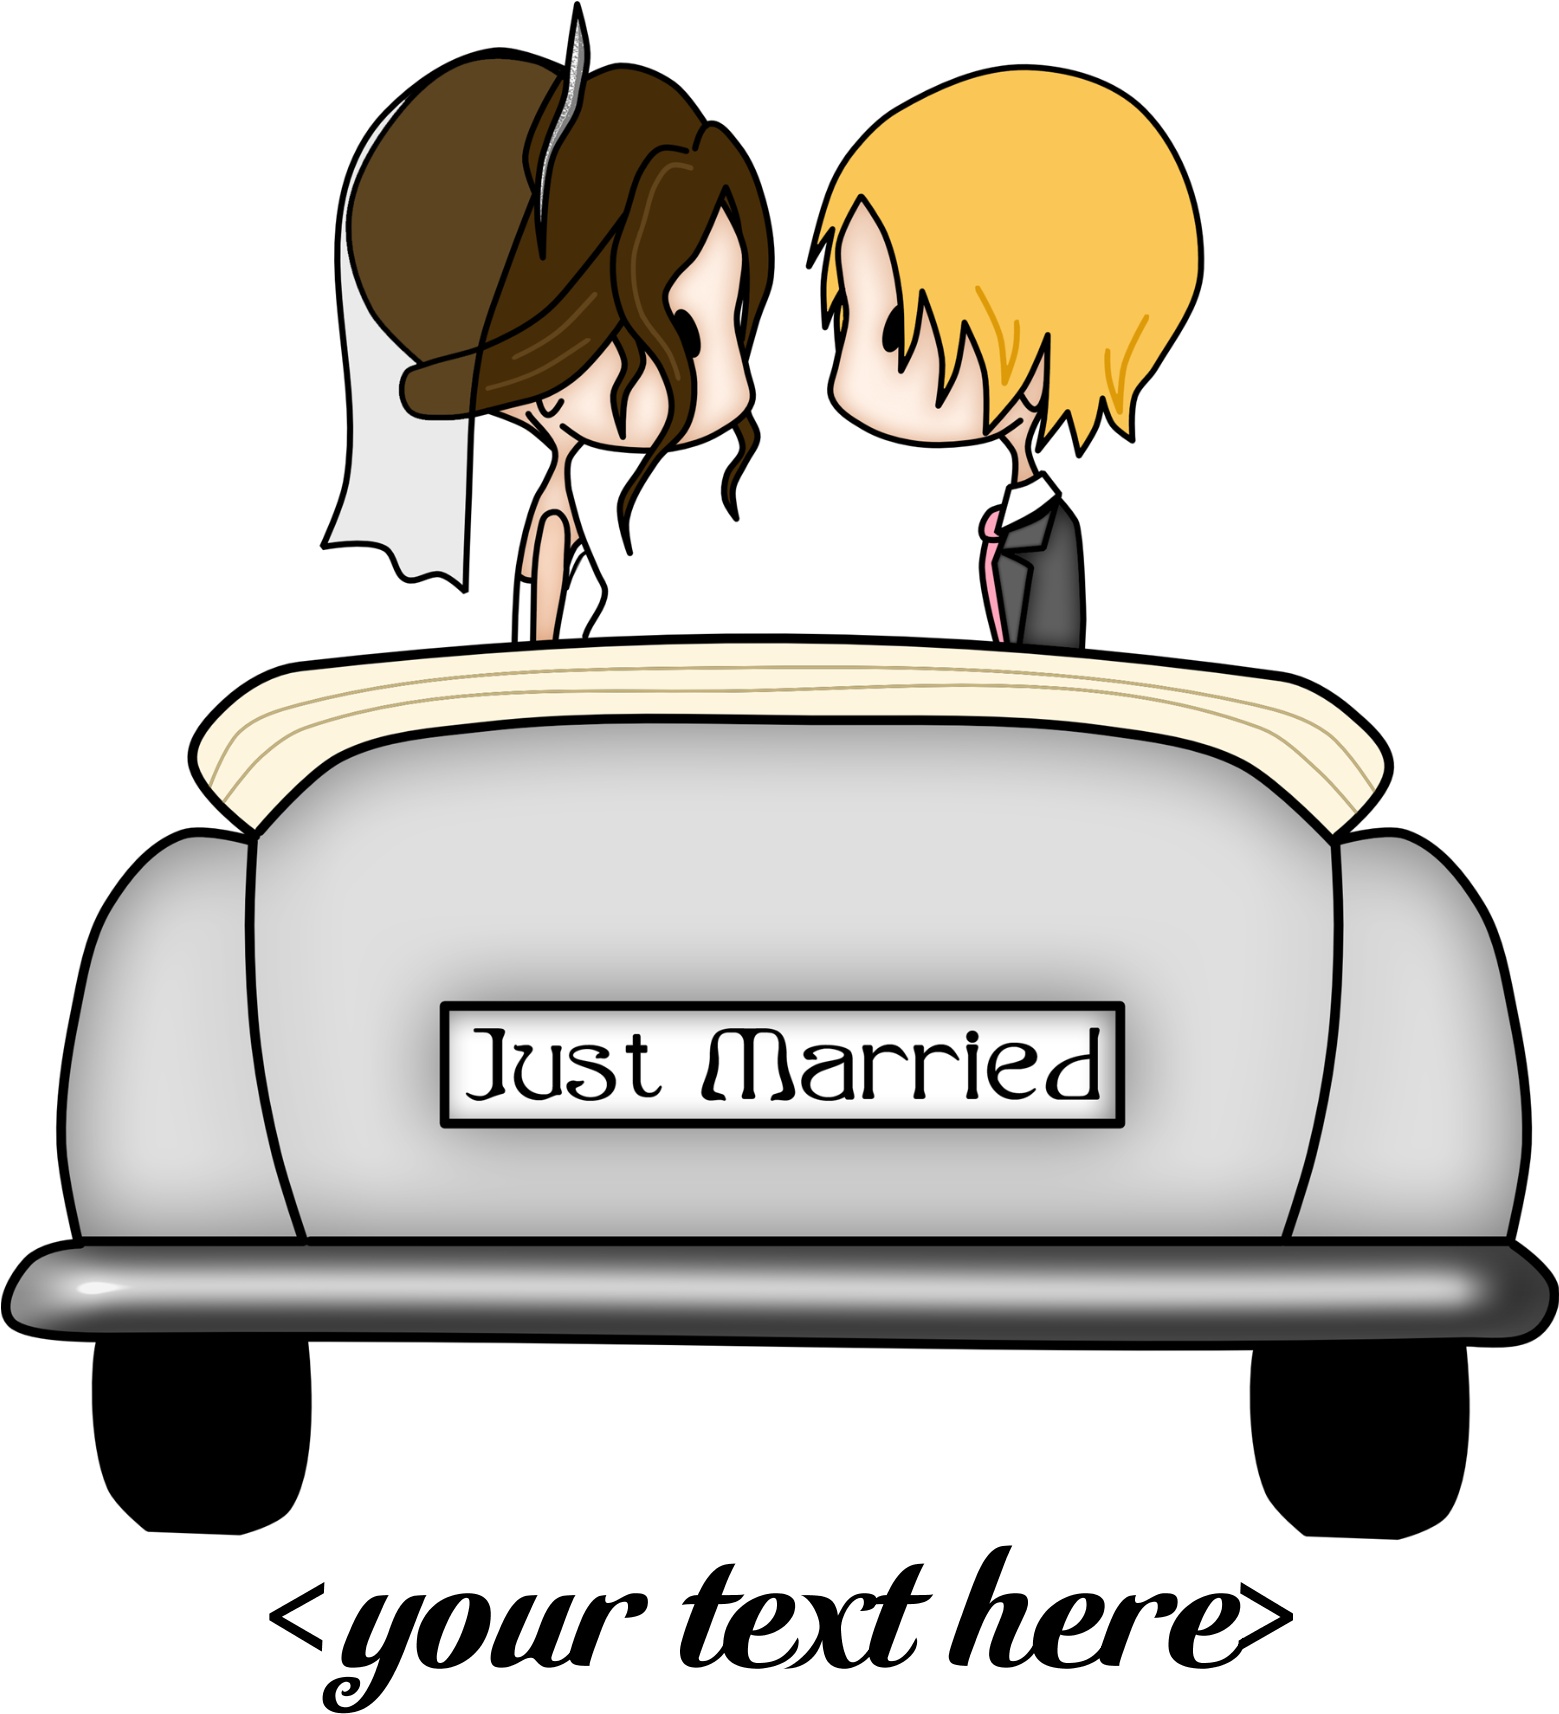 A Cartoon Of A Couple In A Wedding Dress And A Coffin